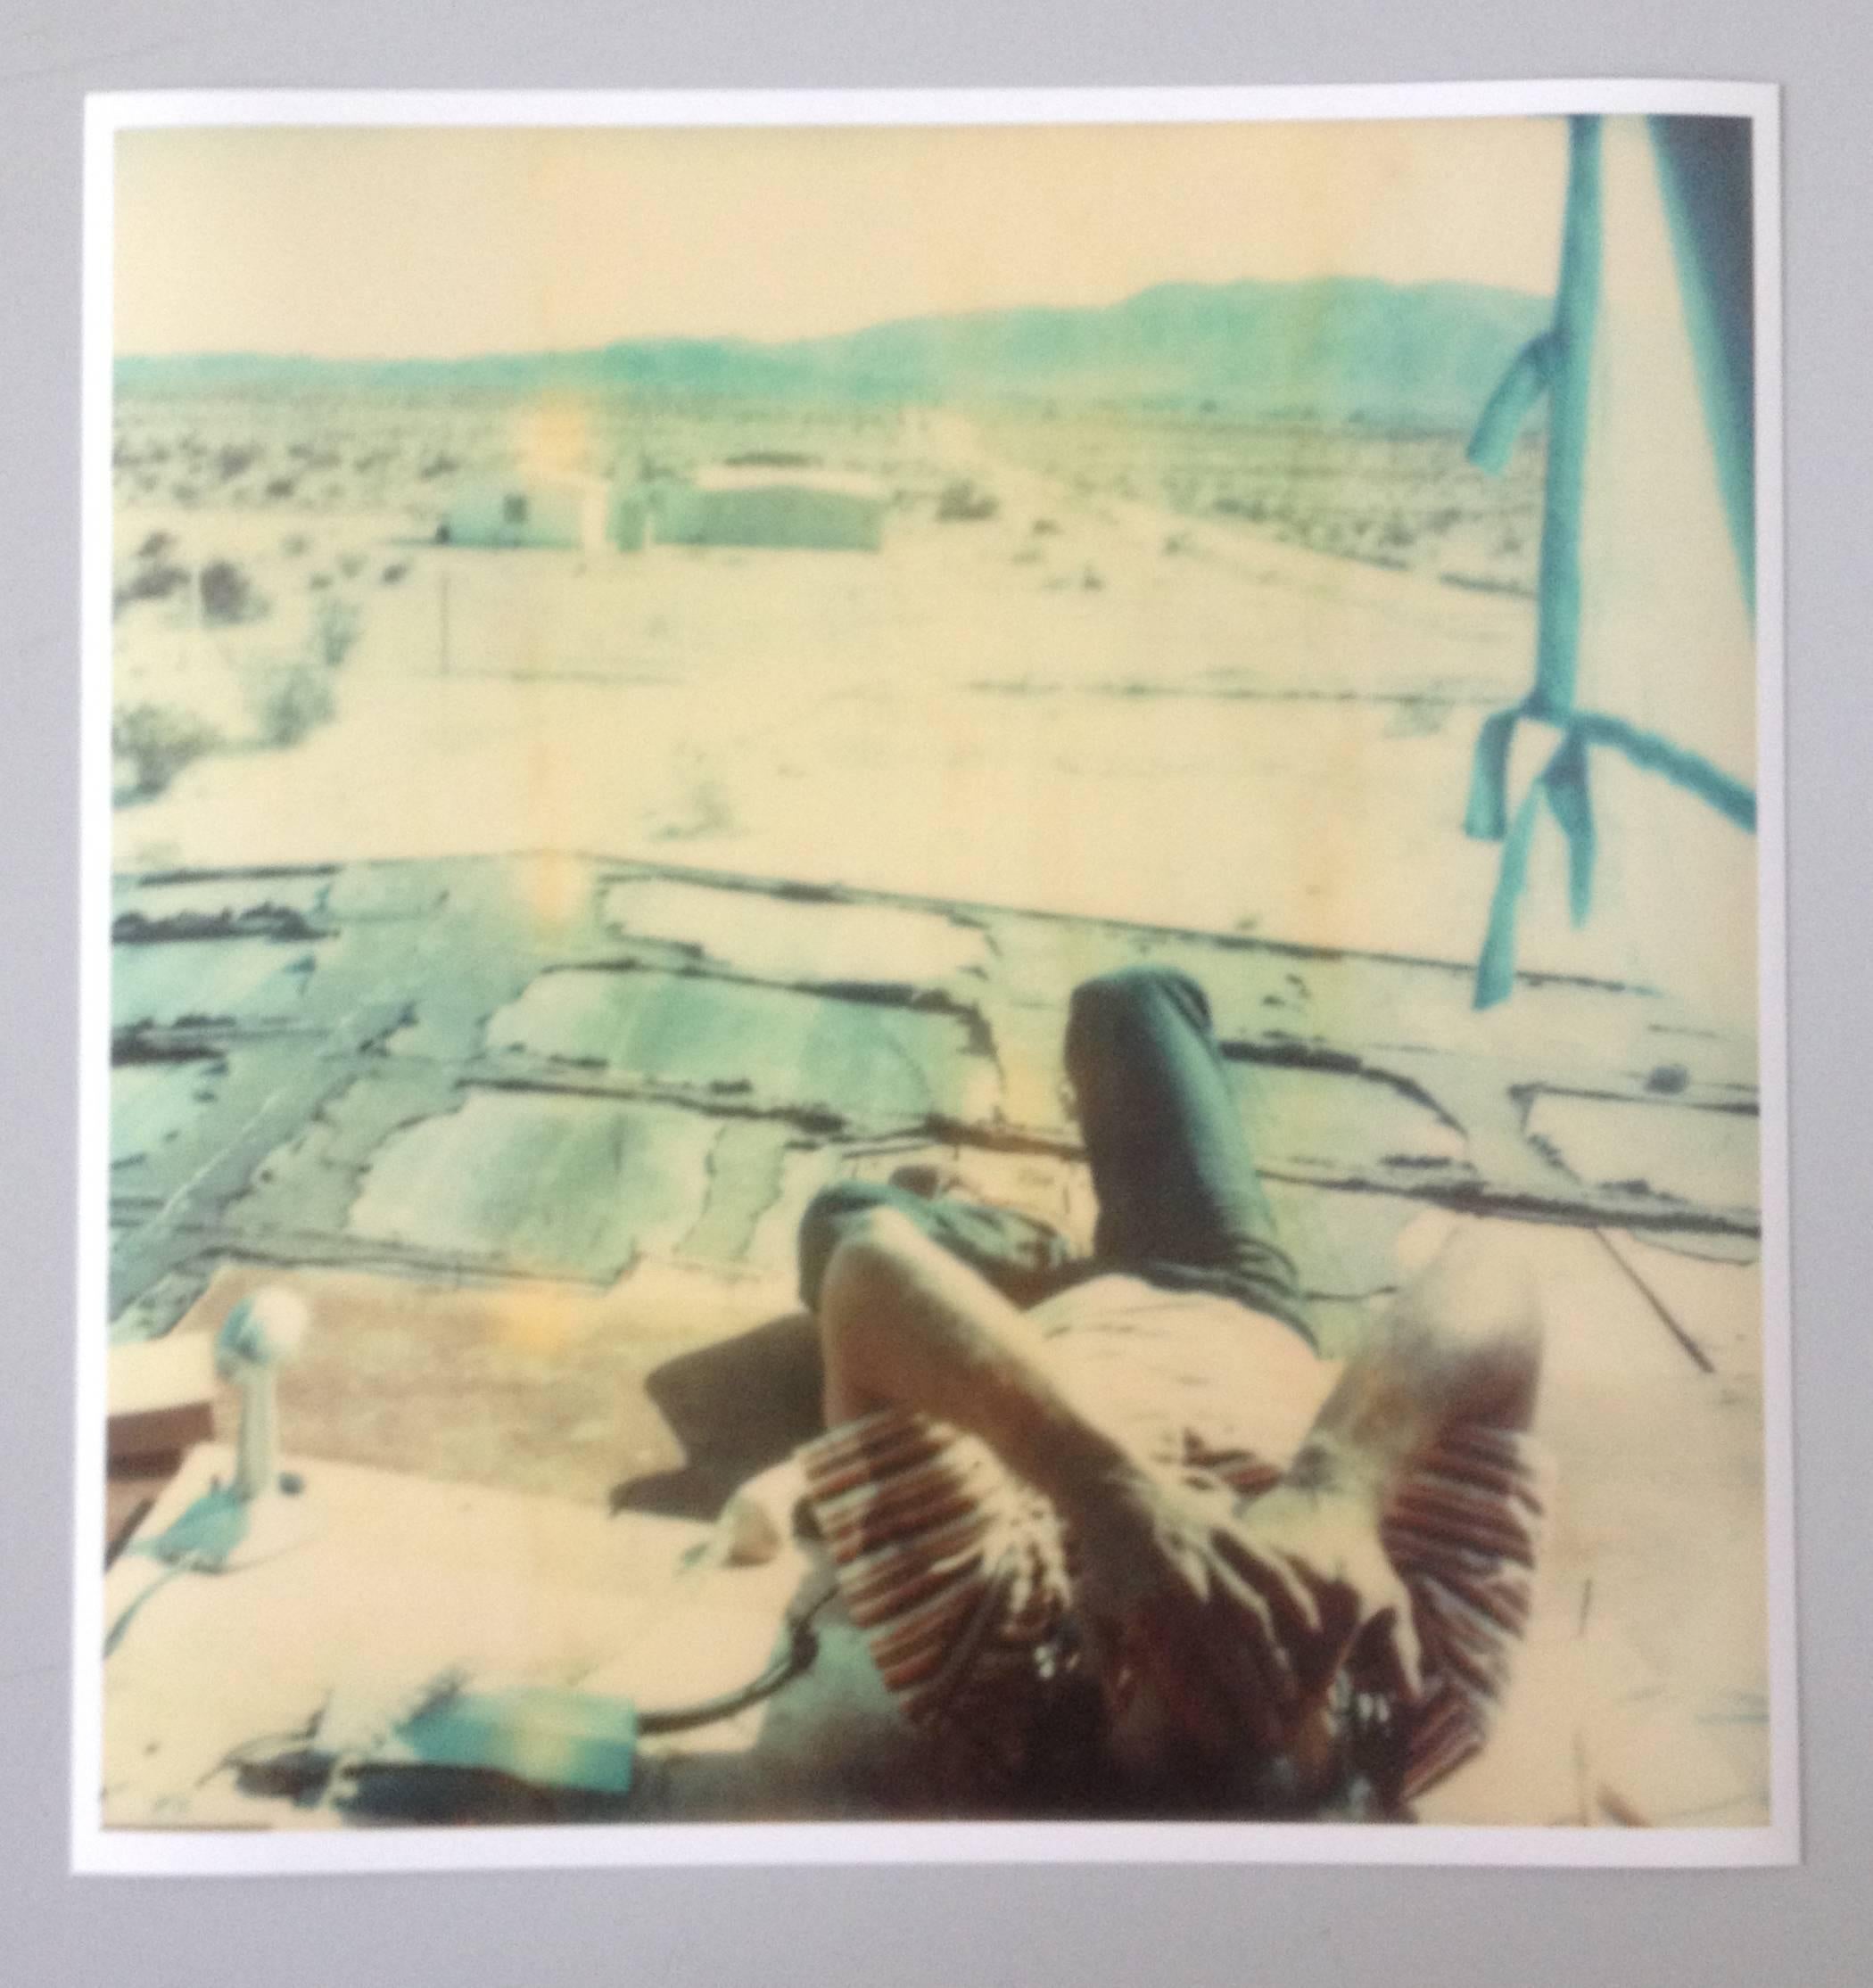 'Wonder Valley View' (The Girl behind the White Picket Fence) - 2013, 

20x20cm, Edition 8/10, 
digital C-Print based on a Polaroid, 
Certificate and Signature label,
Not mounted

Stefanie Schneider lives and works in the High Desert of Southern